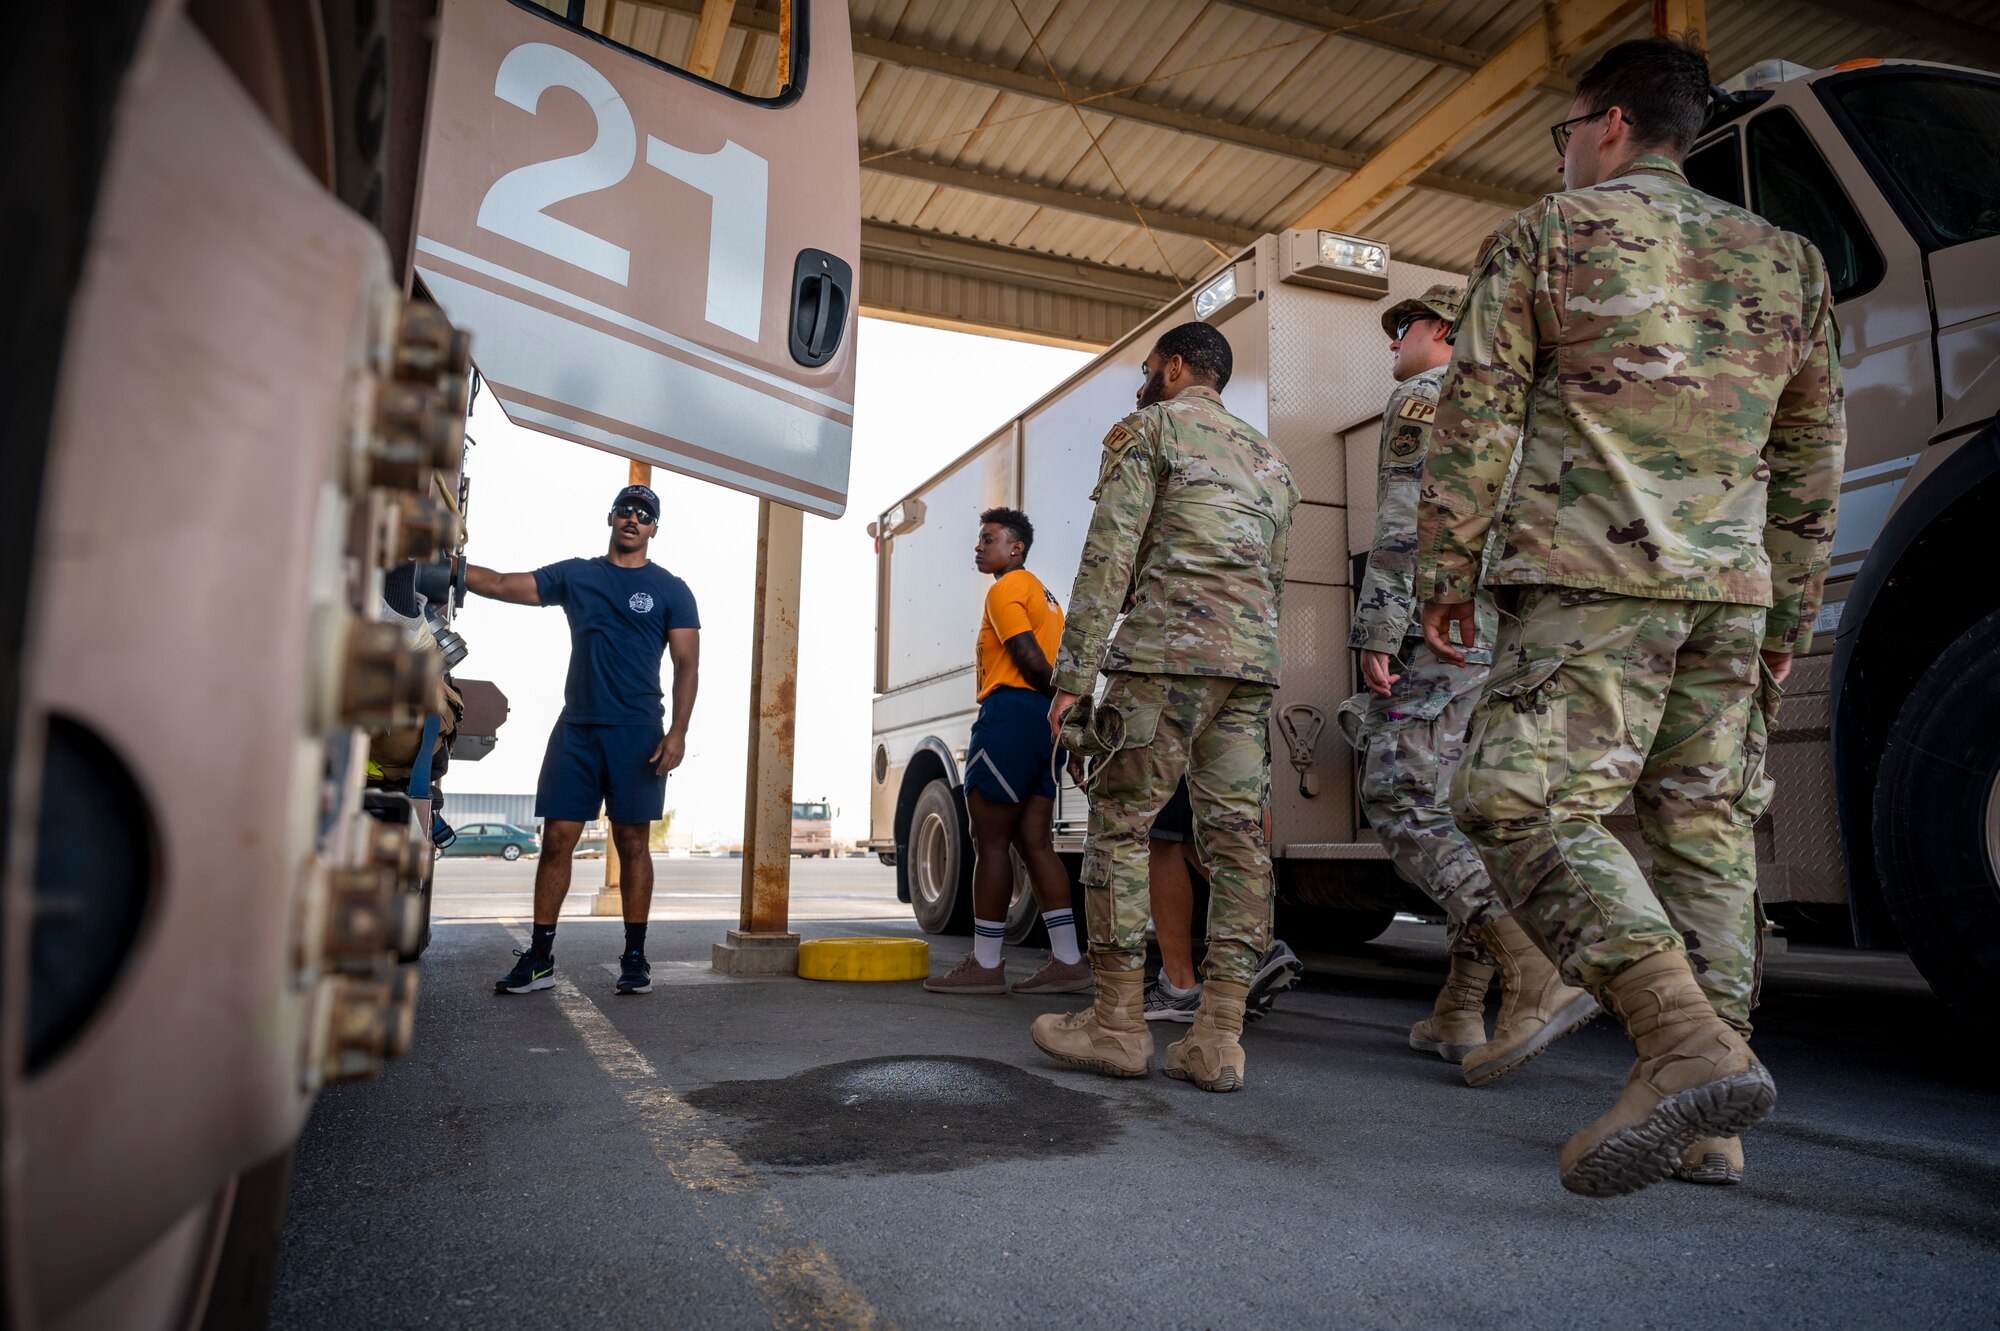 U.S. Air Force Airman 1st Class William Shaw, left, 379th Expeditionary Civil Engineer Squadron firefighter, shows a group of Airmen various components of a fire engine at Al Udeid Air Base, Qatar, Nov. 27, 2021.